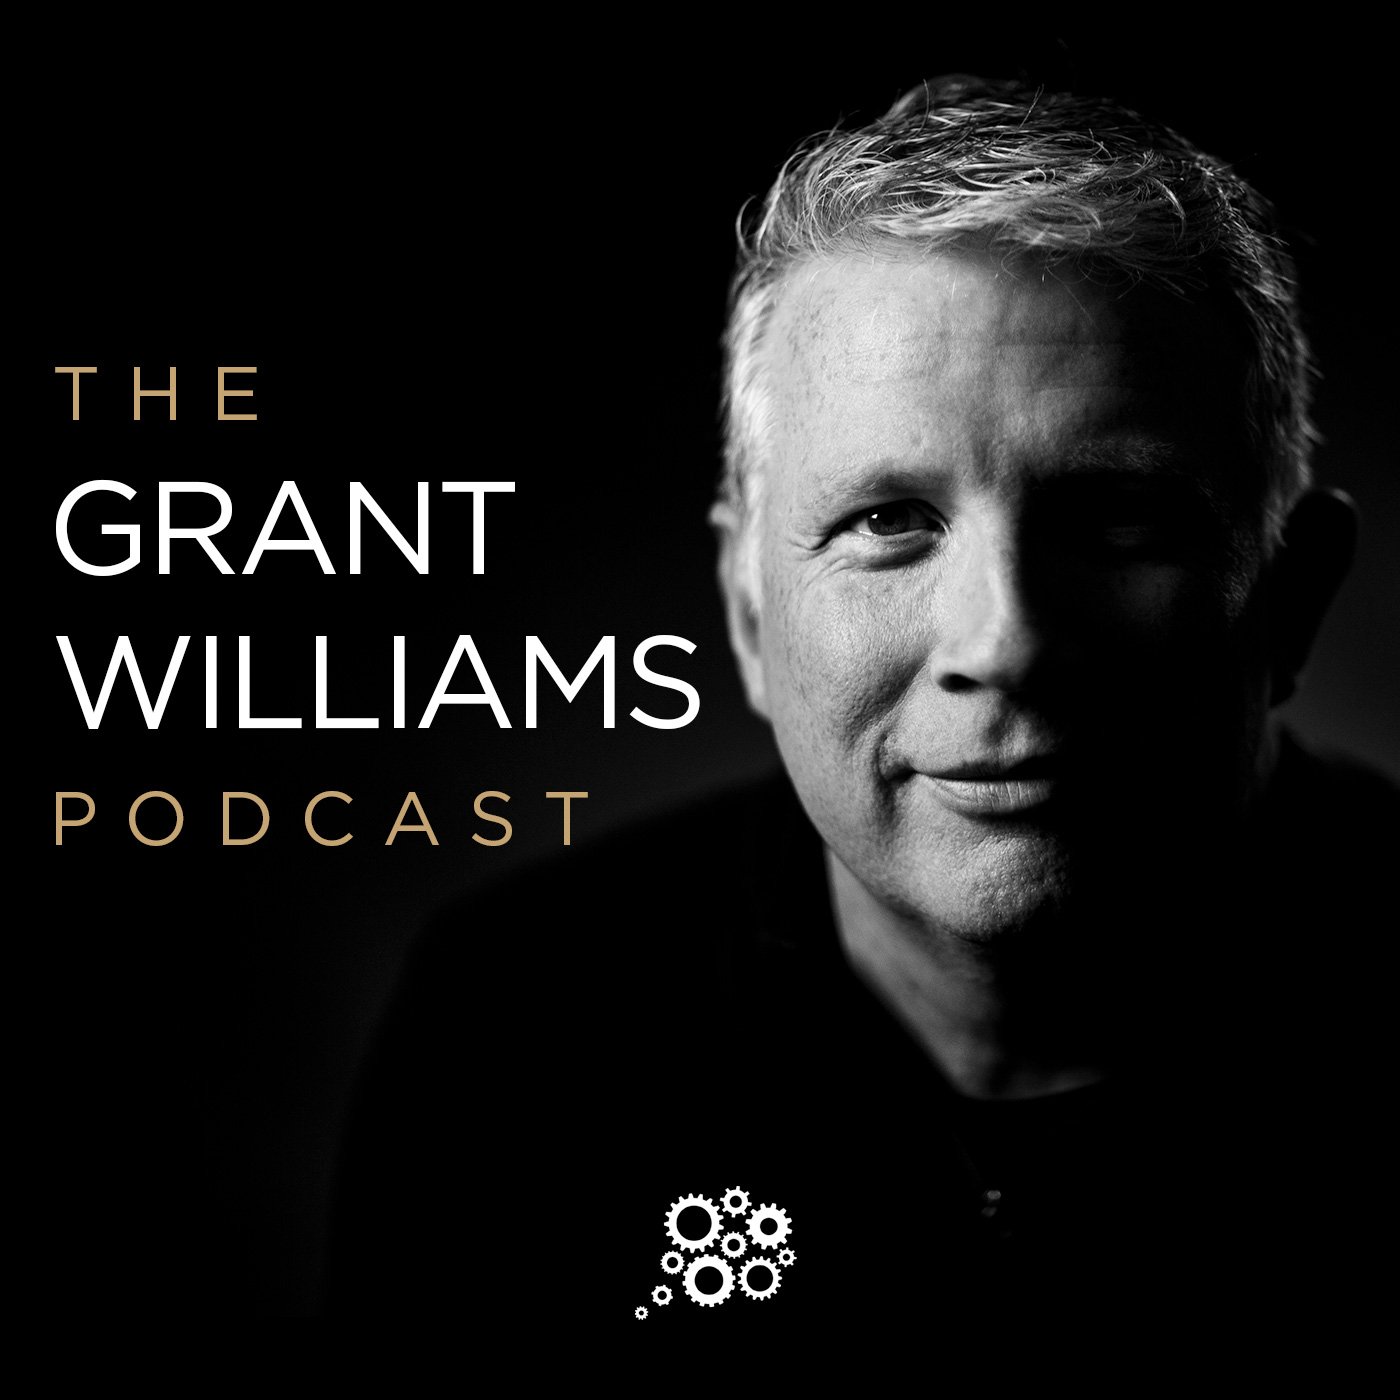 The Grant Williams Podcast: Michael Oliver